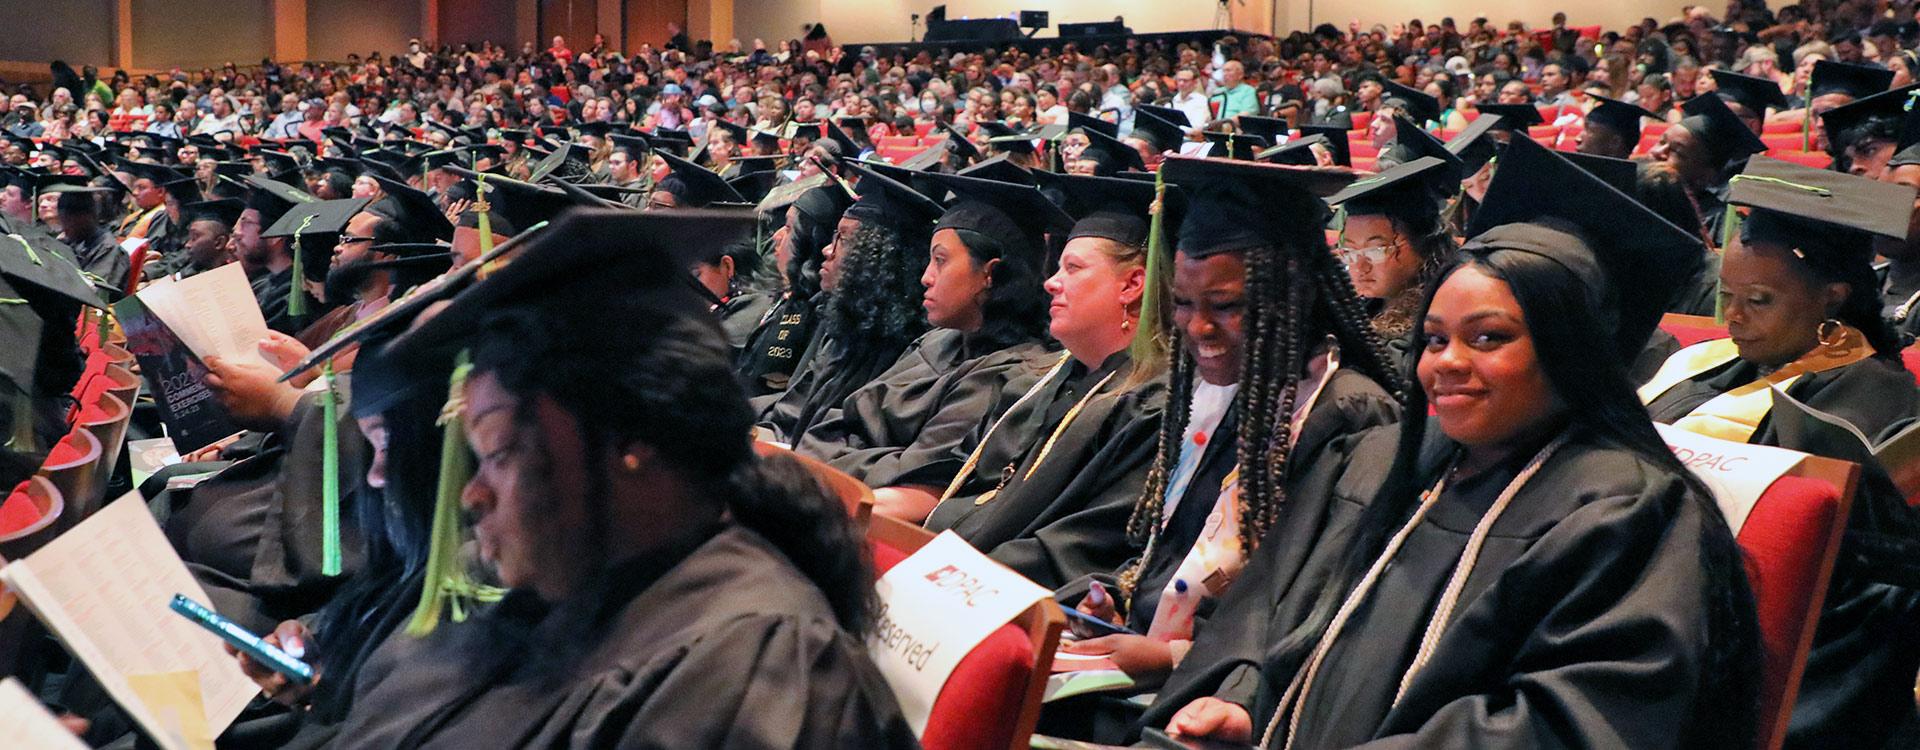 audience of graduates wearing regalia at commencement ceremony